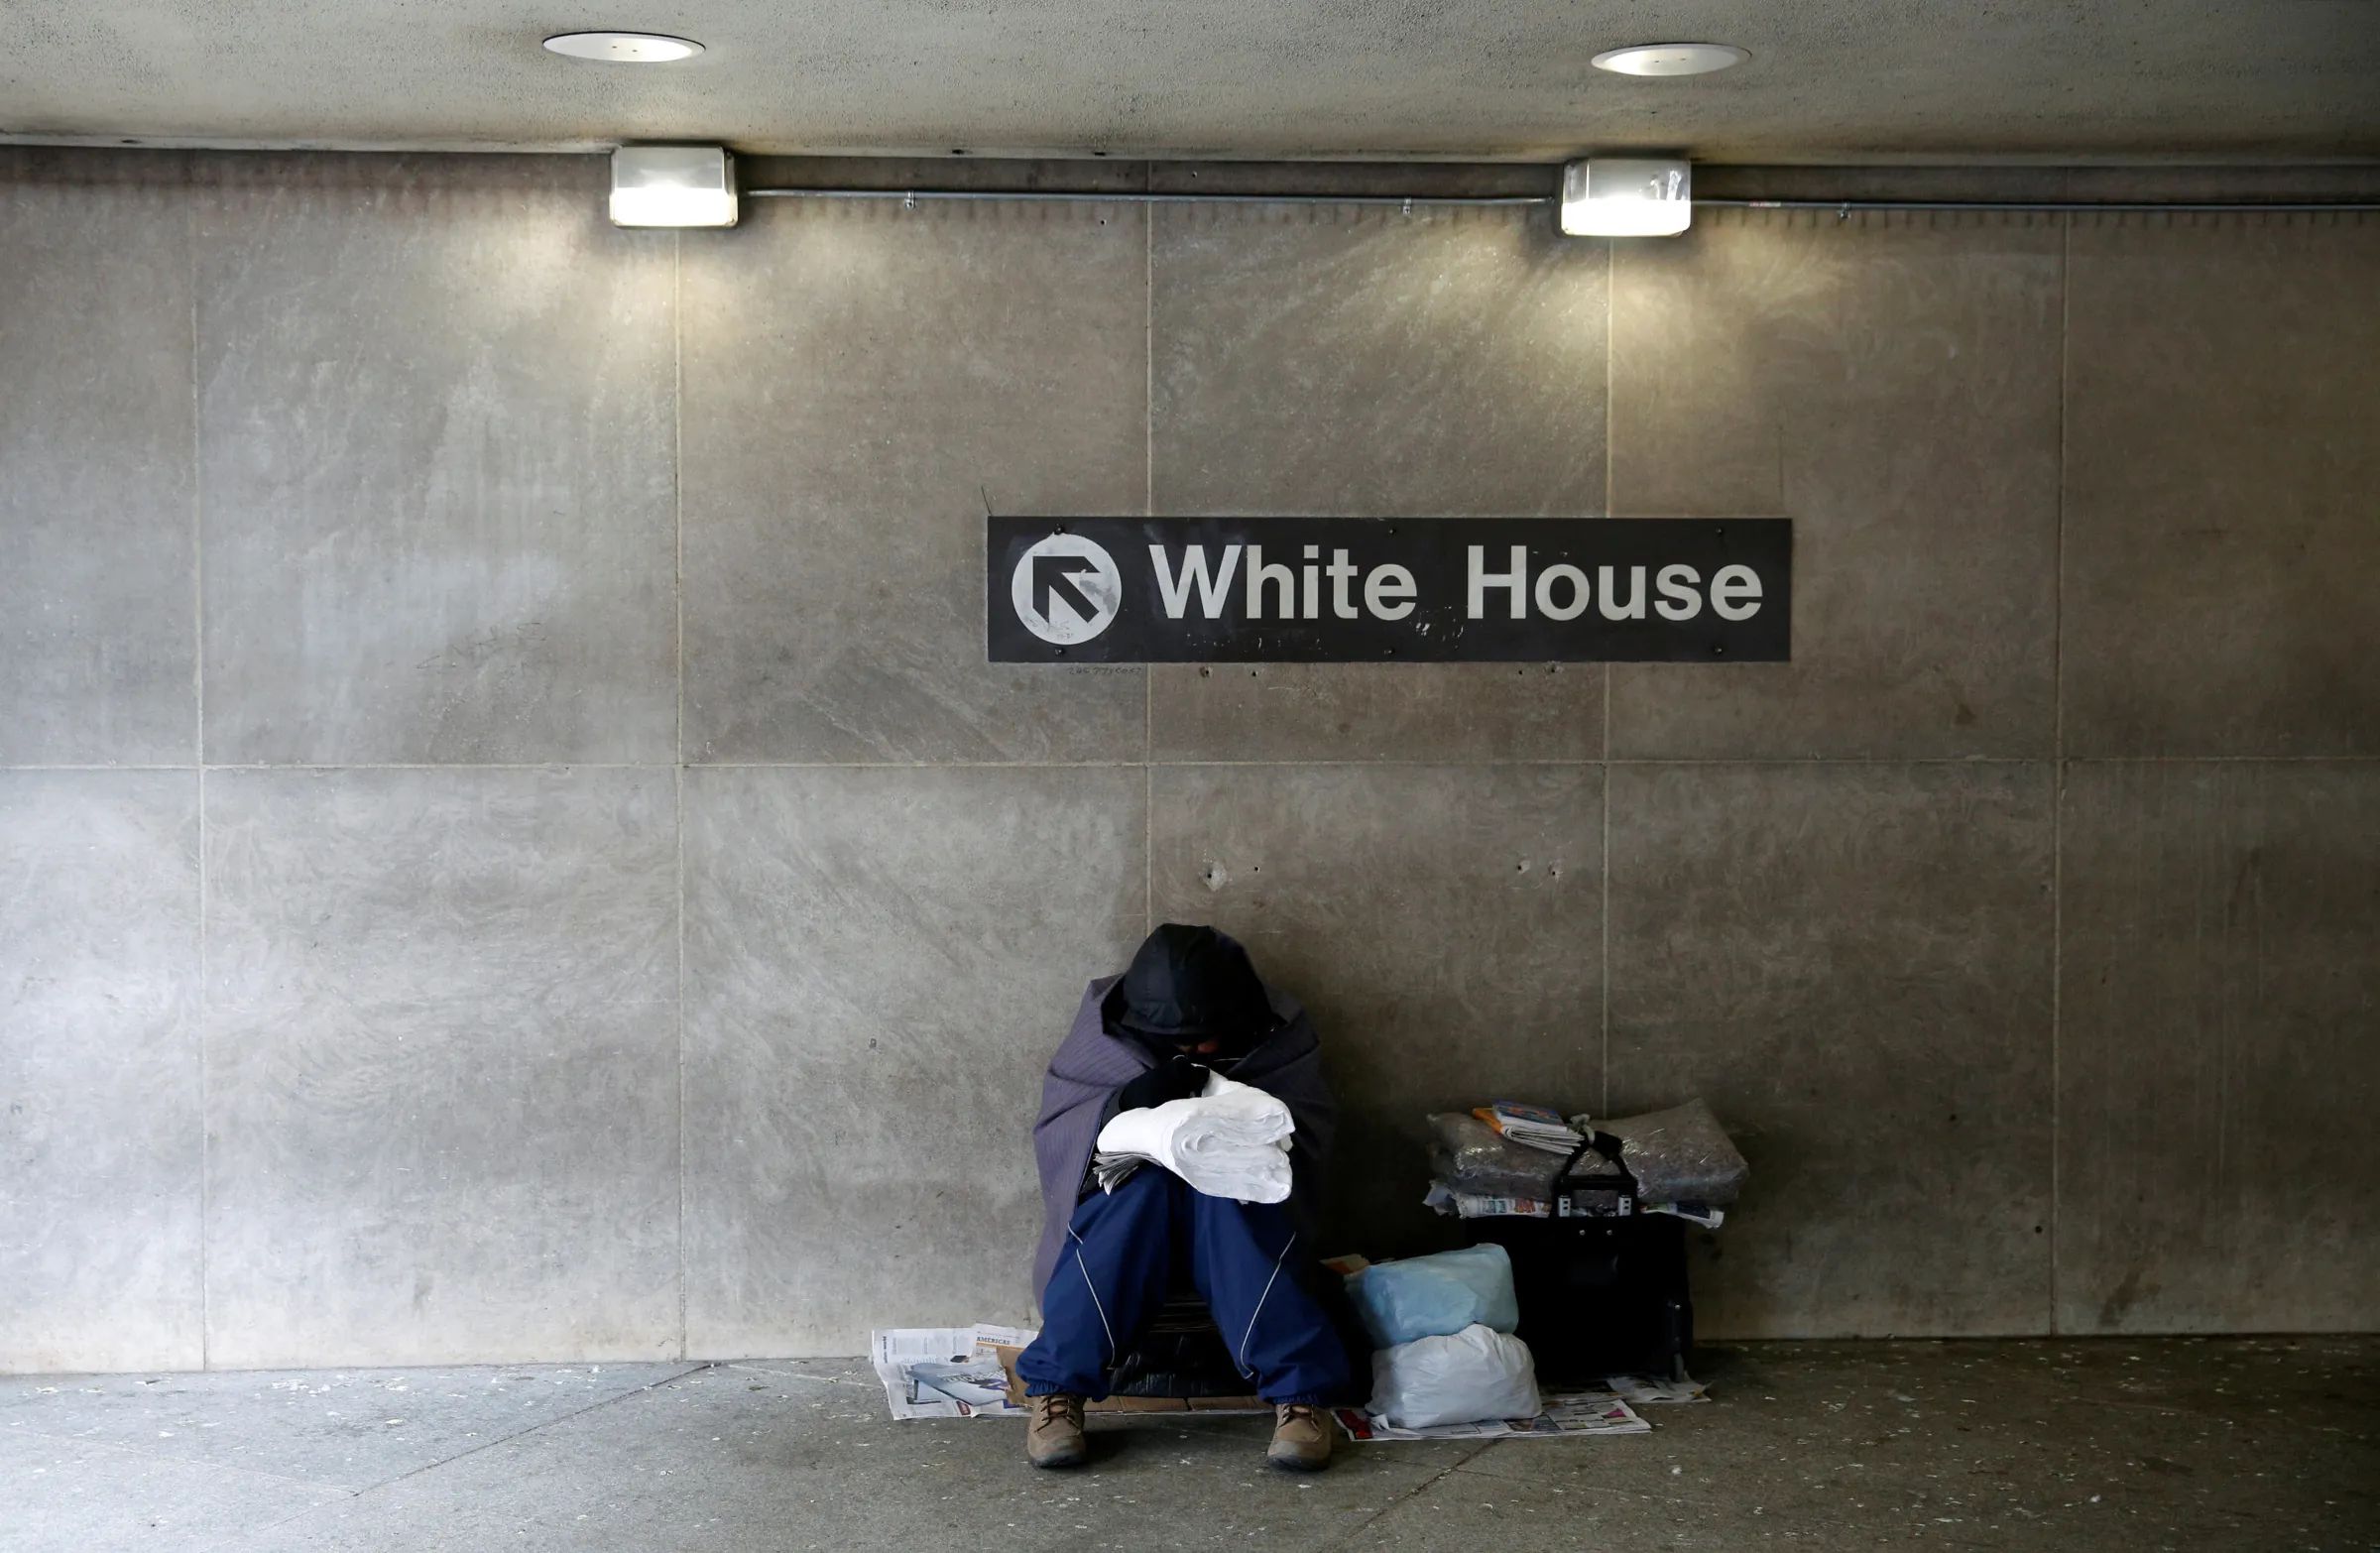 On an unseasonably cold day, a homeless person tries to stay warm at the entrance of a subway station near the White House in Washington January 20, 2016